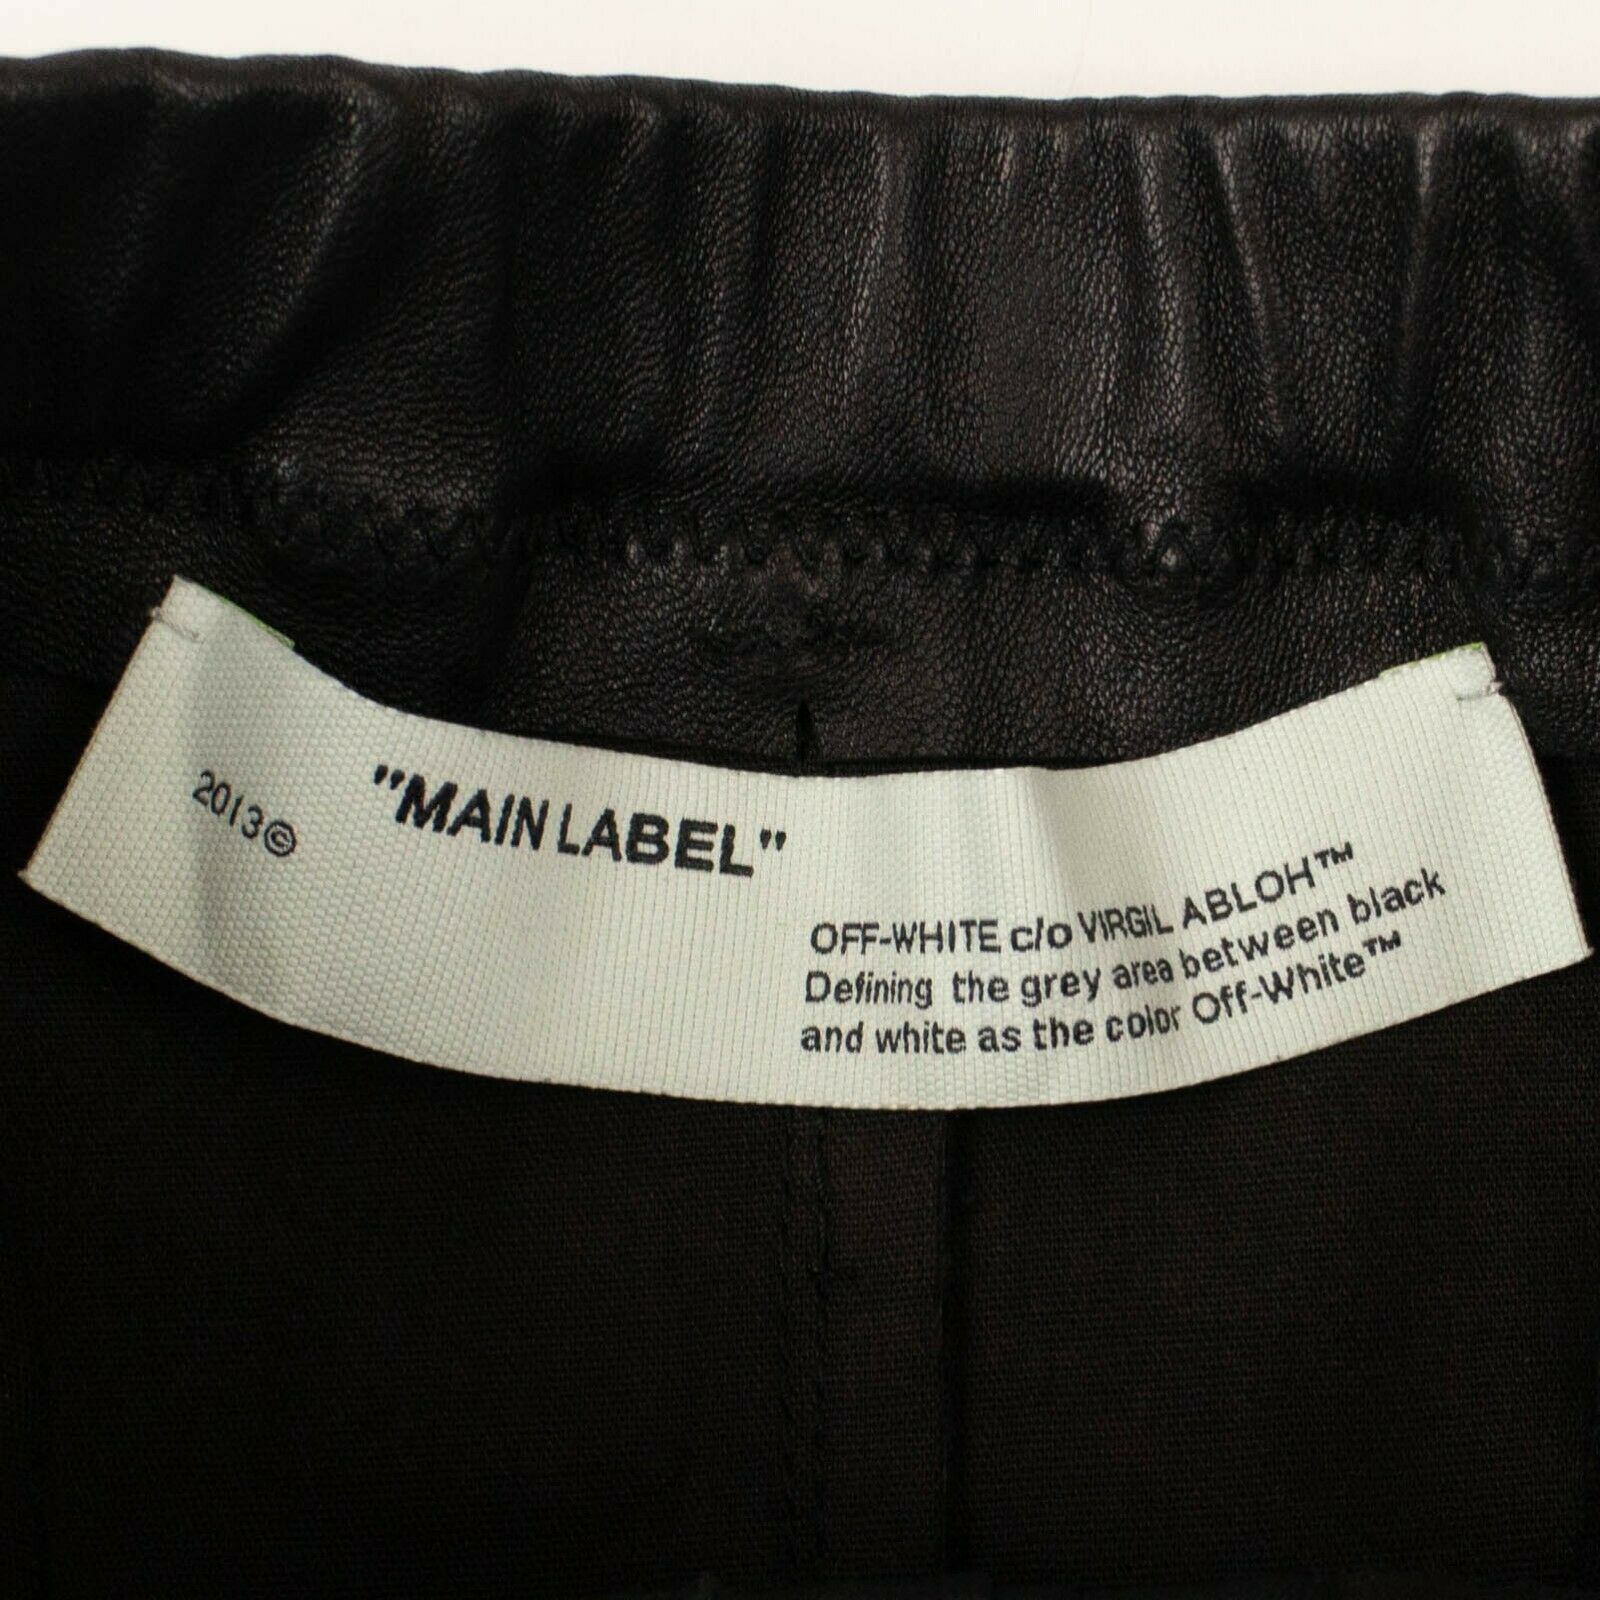 Off-White C/O Virgil Abloh High Waisted Leather Pants - Black